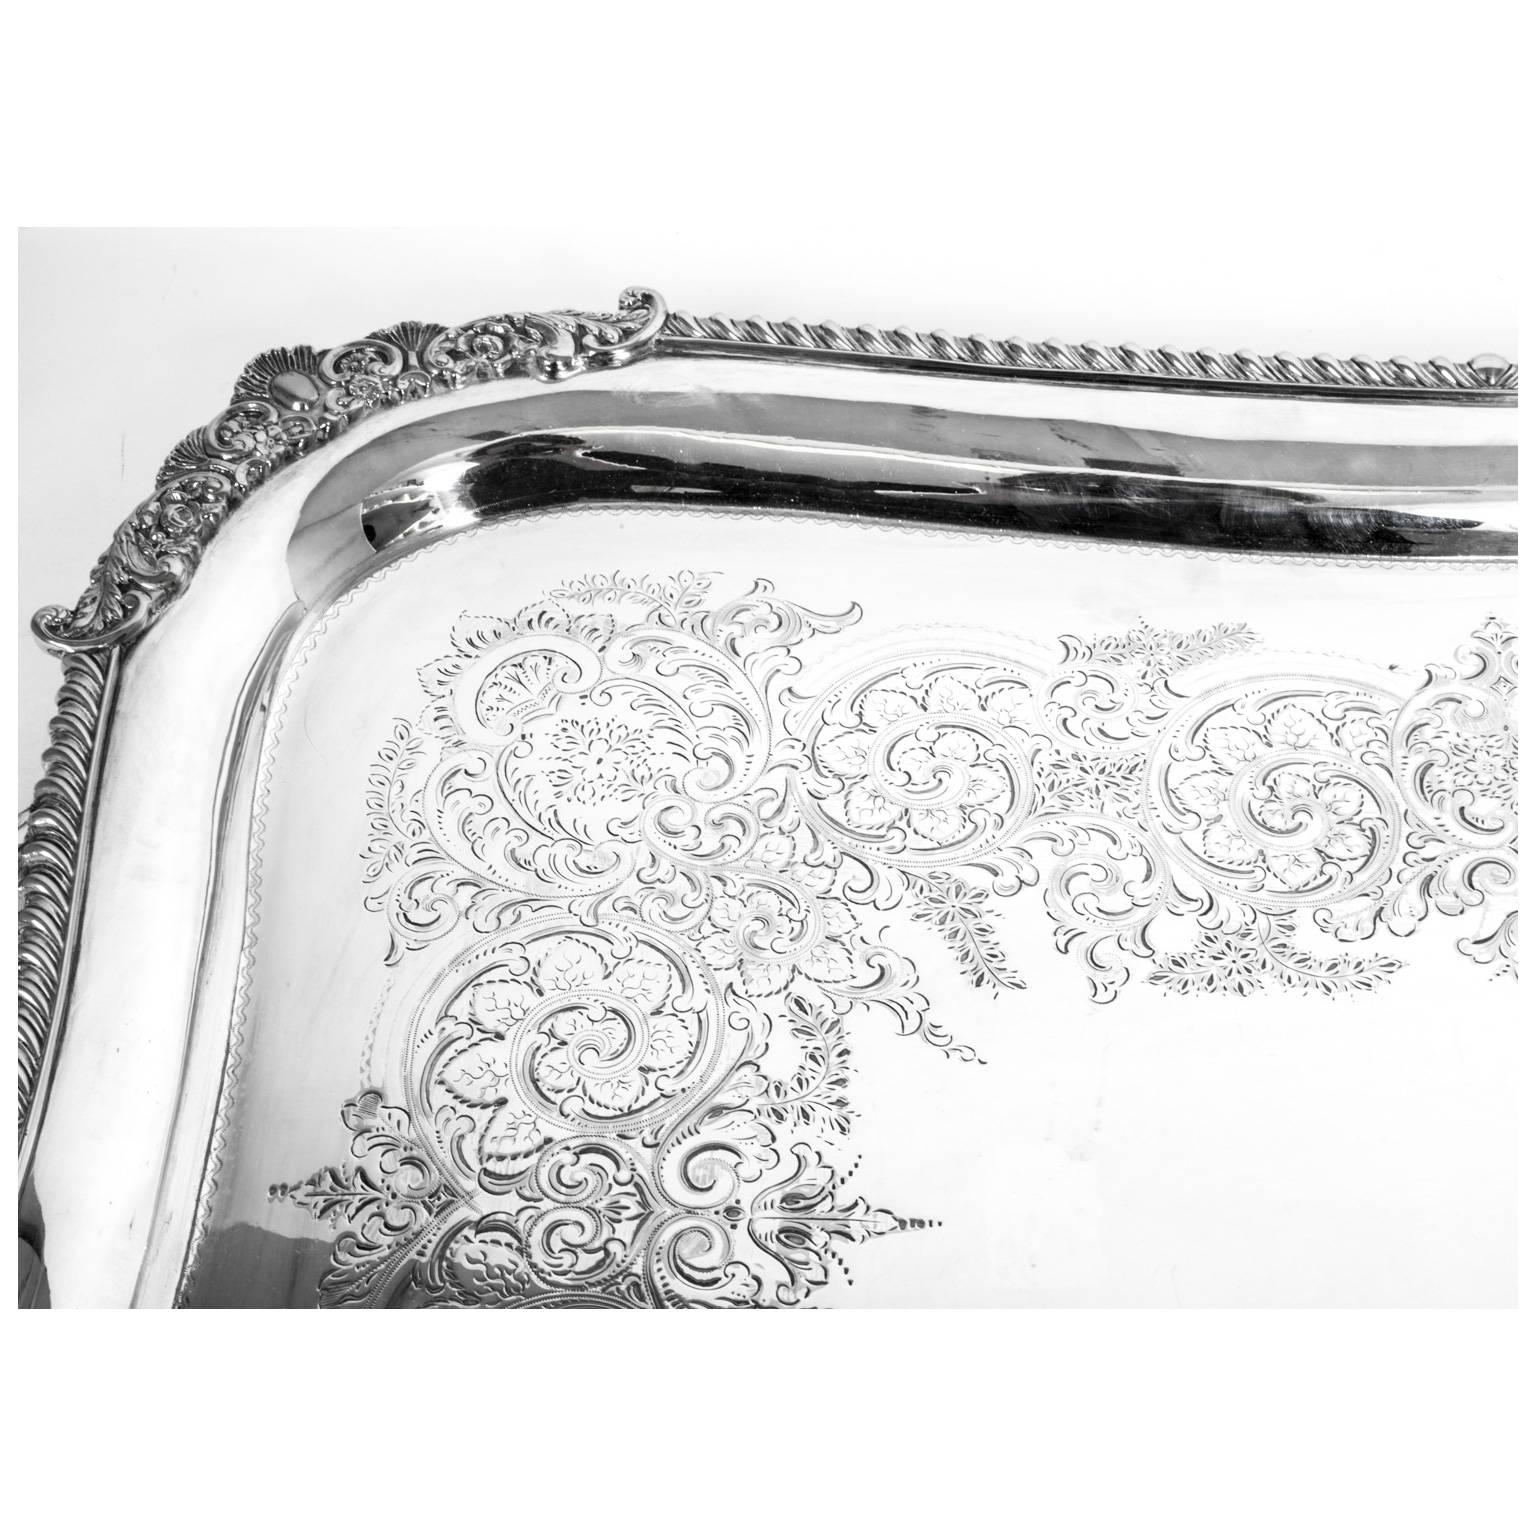 English Antique Large Victorian Silver Plated Tray William Hutton & Sons, circa 1870